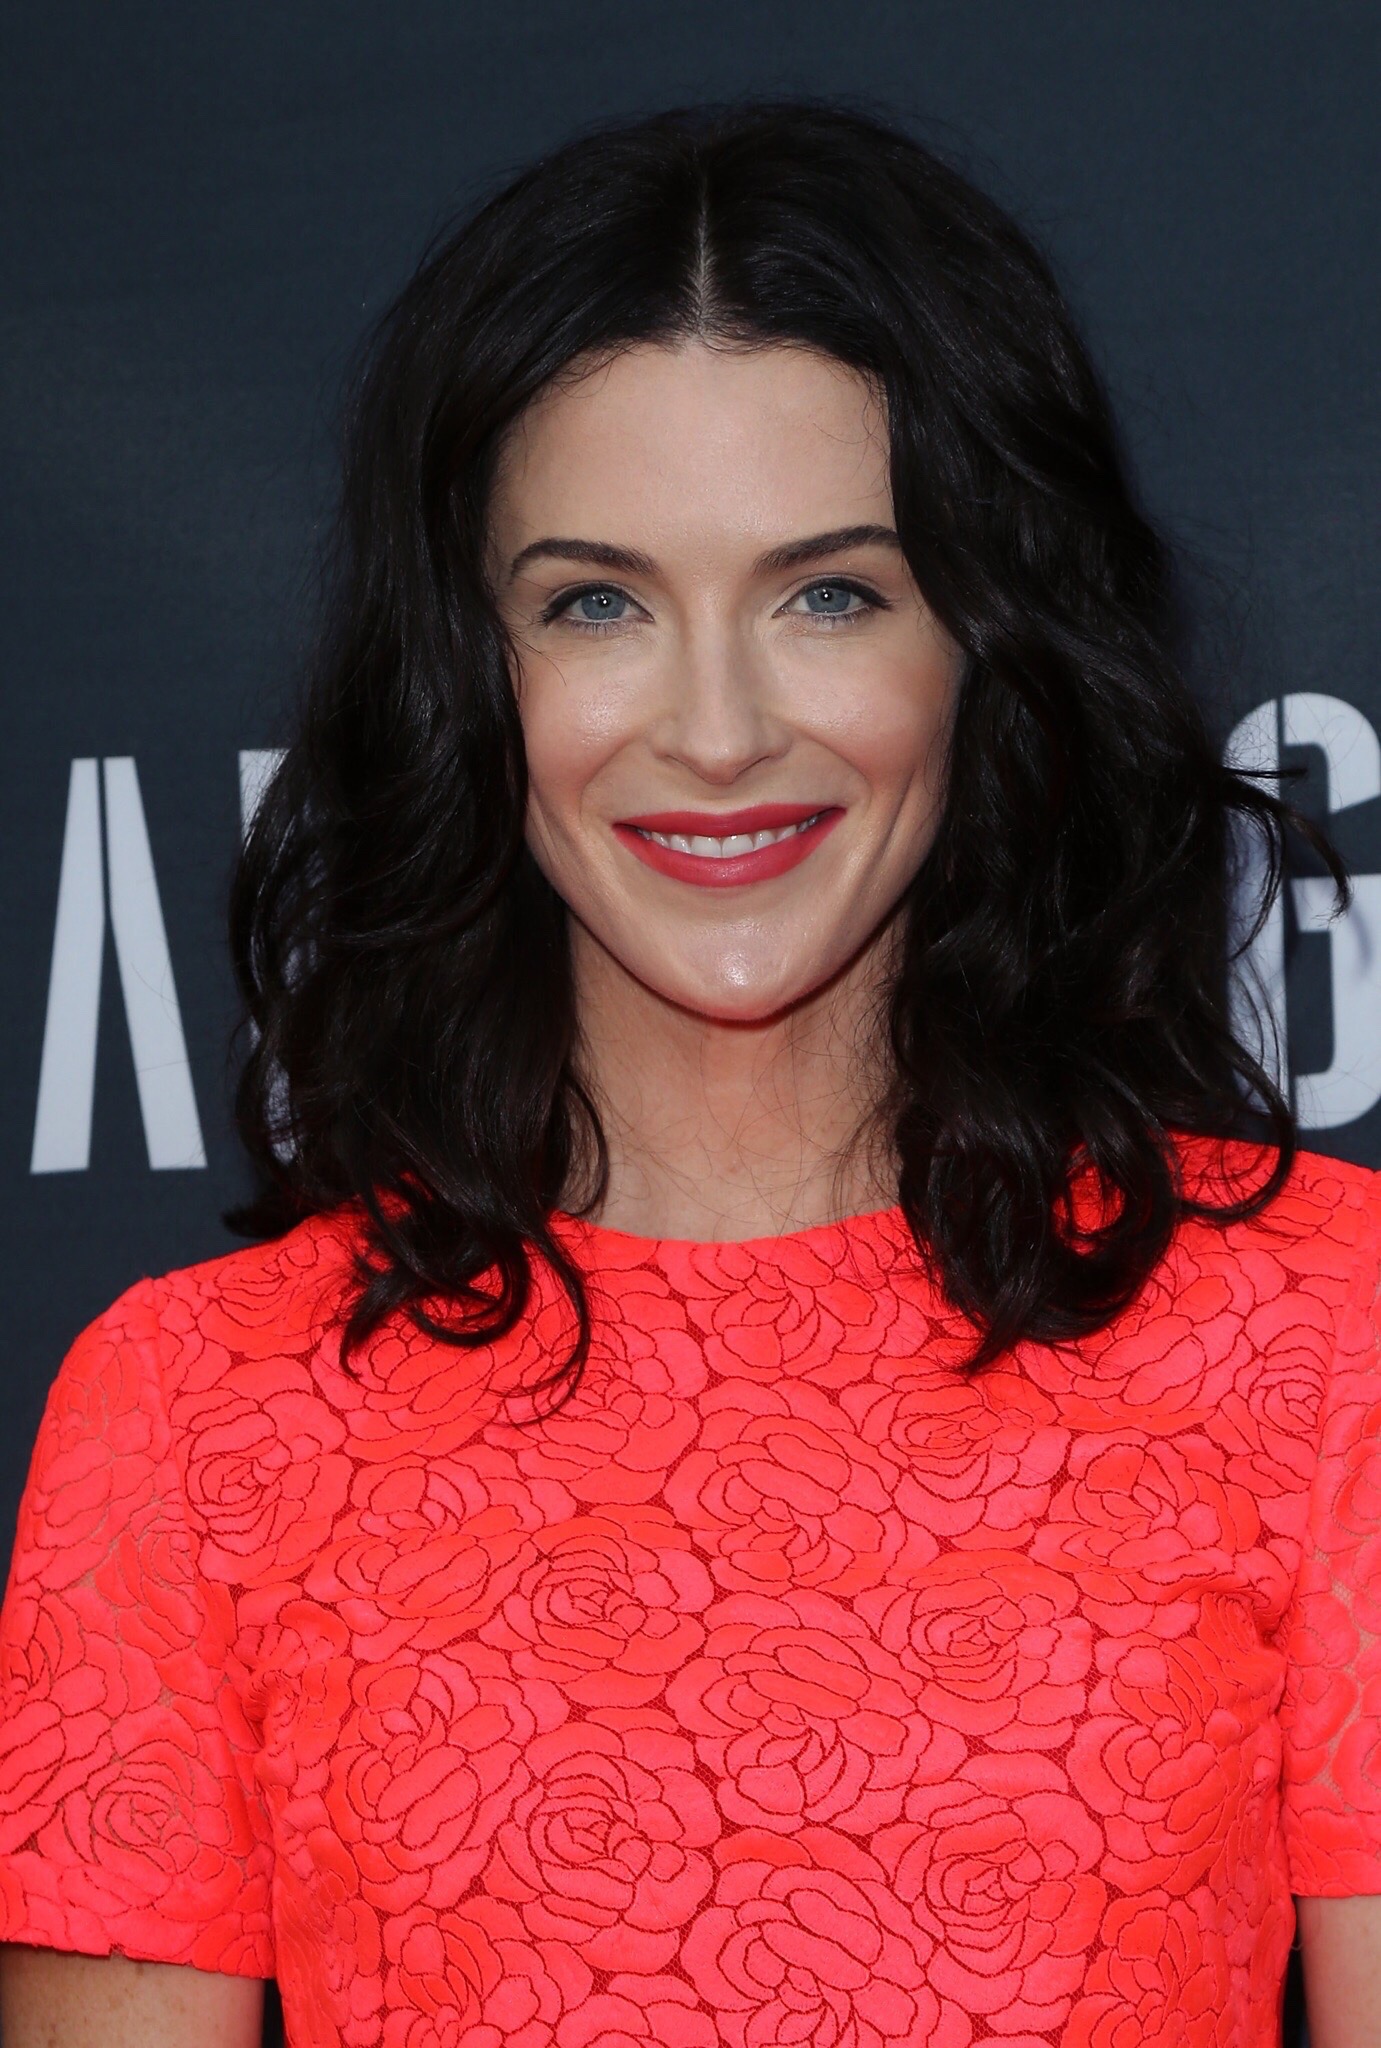 Bridget Regan attends the premiere of Amazon's Series 'Hand of God' at Ace Theater Downtown Los Angeles, California.